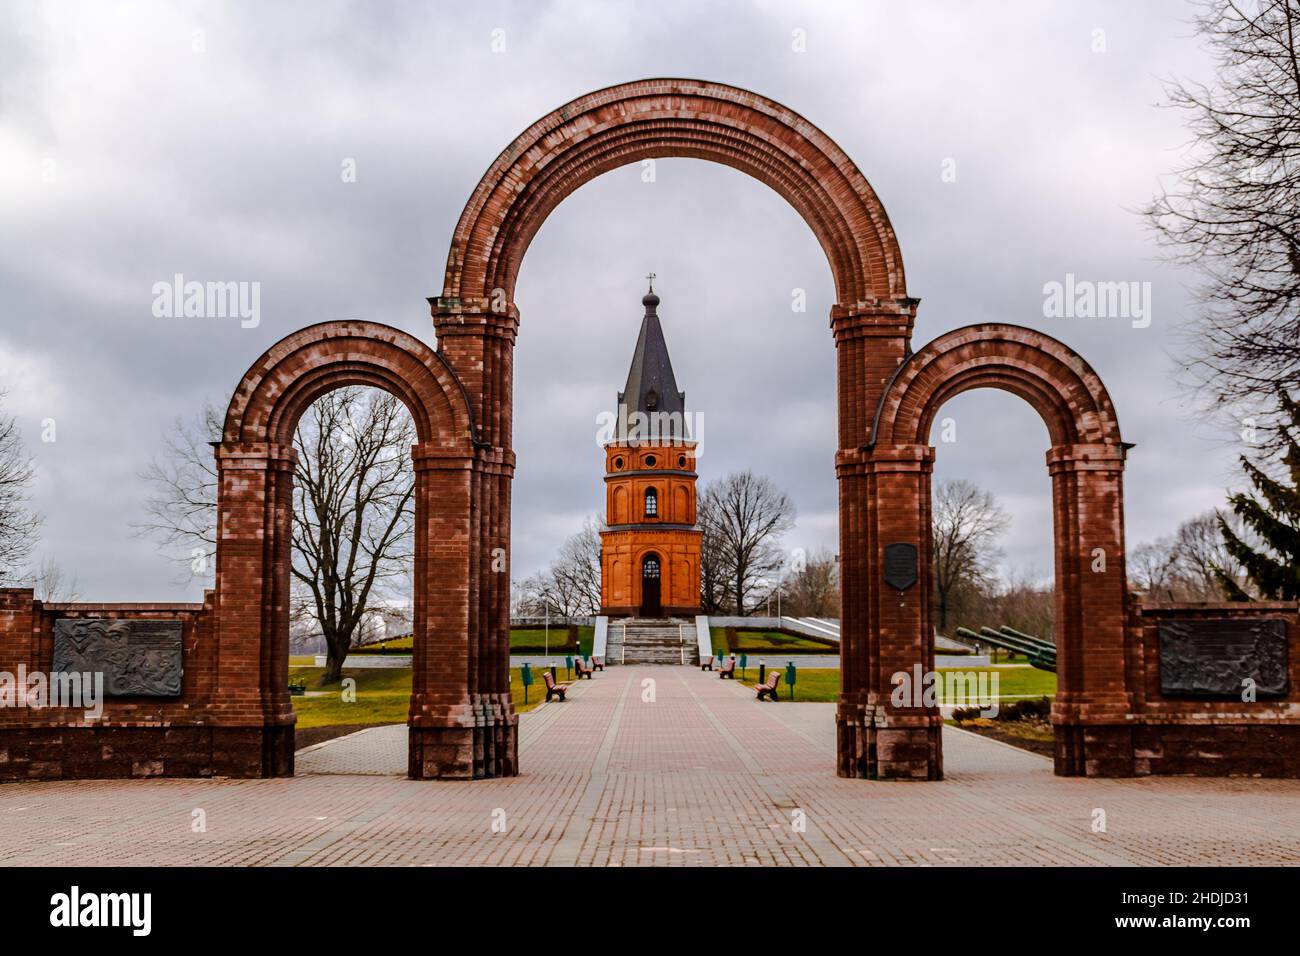 Buynichskoe field WWII memorial. Mogilev, Belarus - 28 November 2021: Gates of the memorial complex and brick red church. Stock Photo